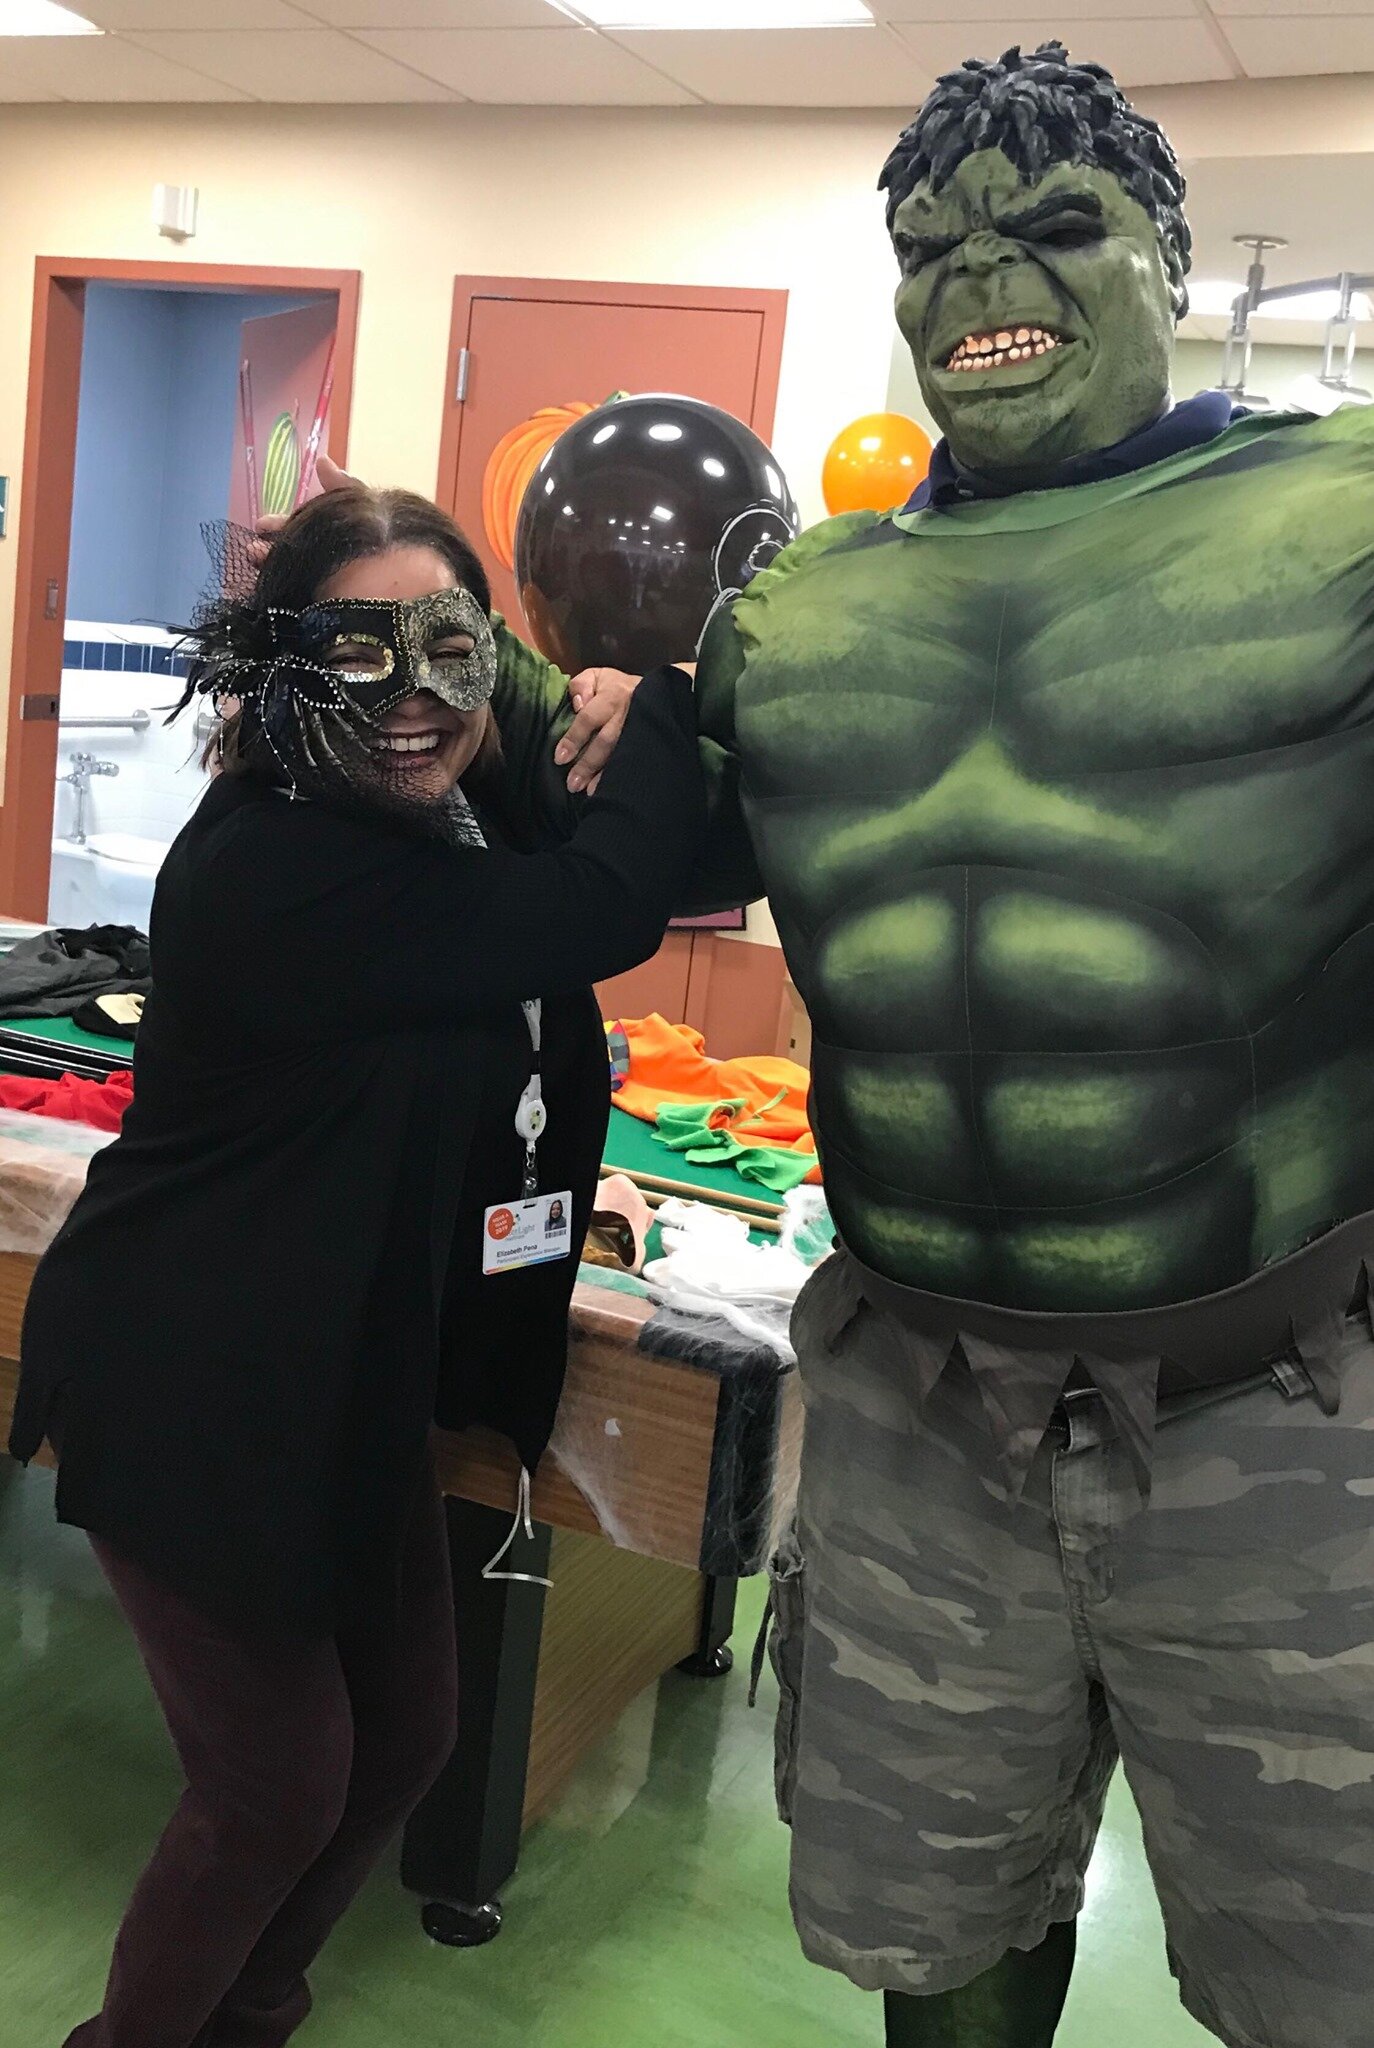 Incredible Hulk pictured with employee